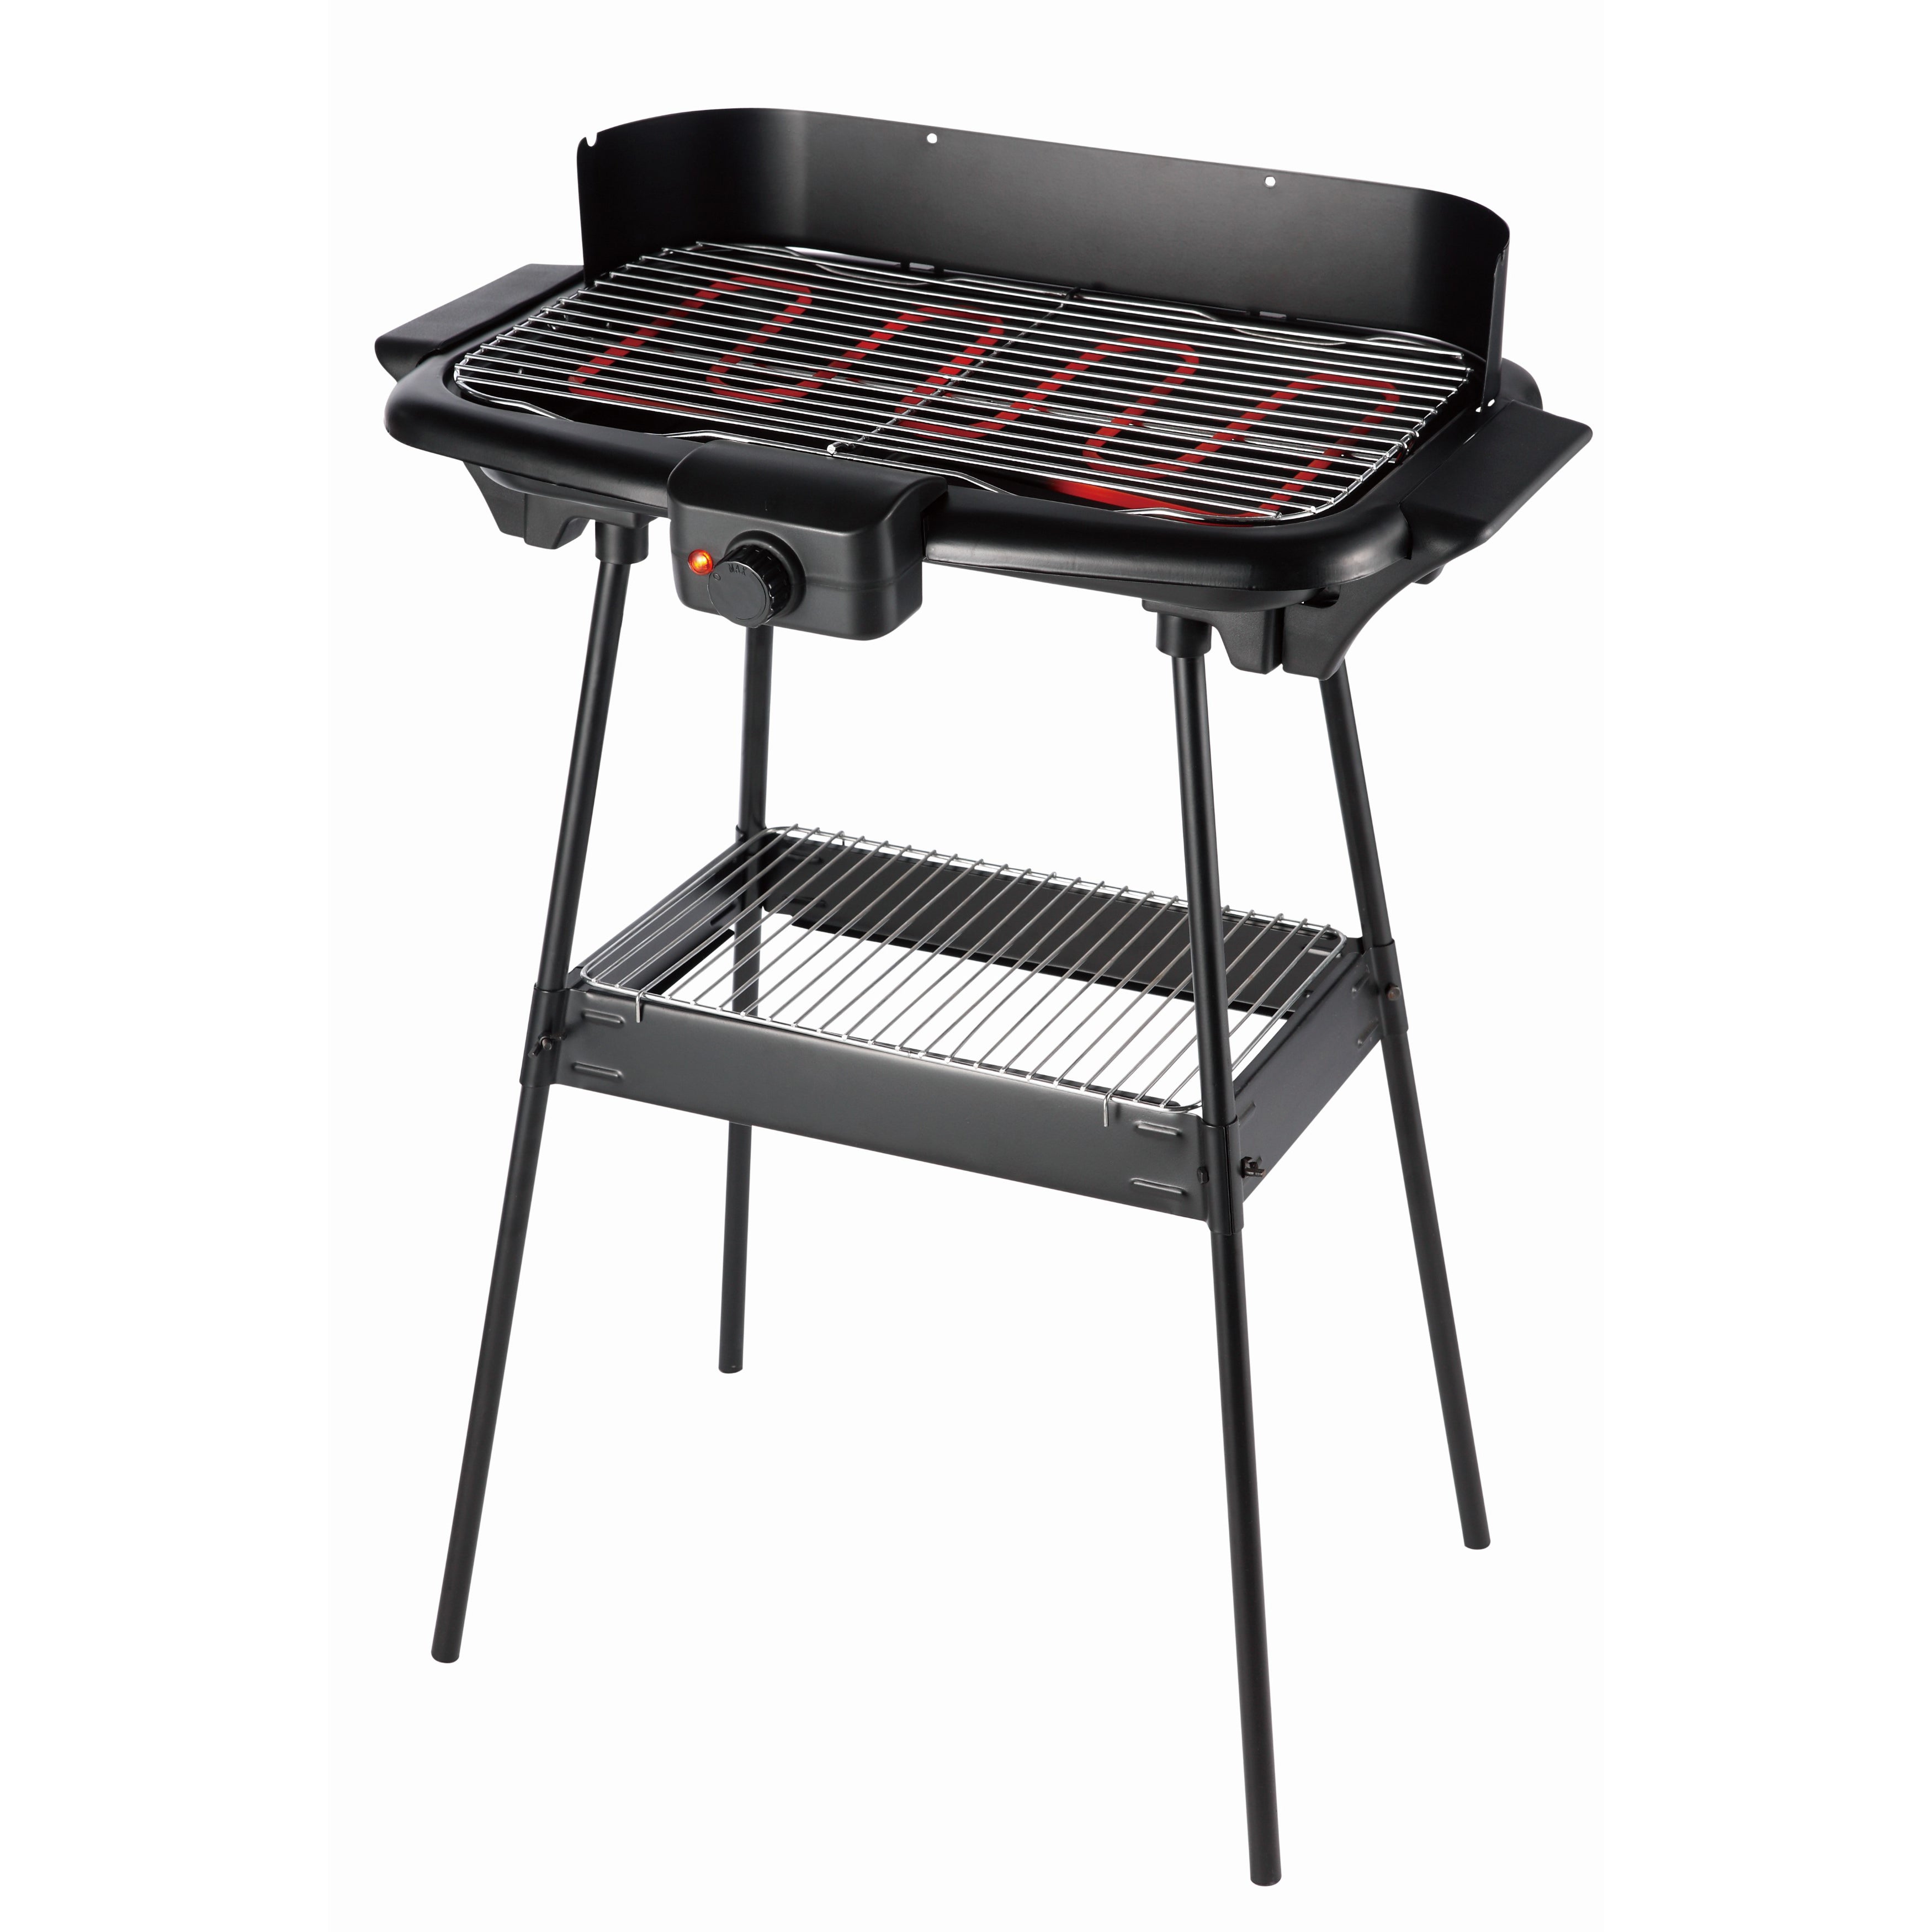 Geepas Food Maker Electric Barbecue Grill